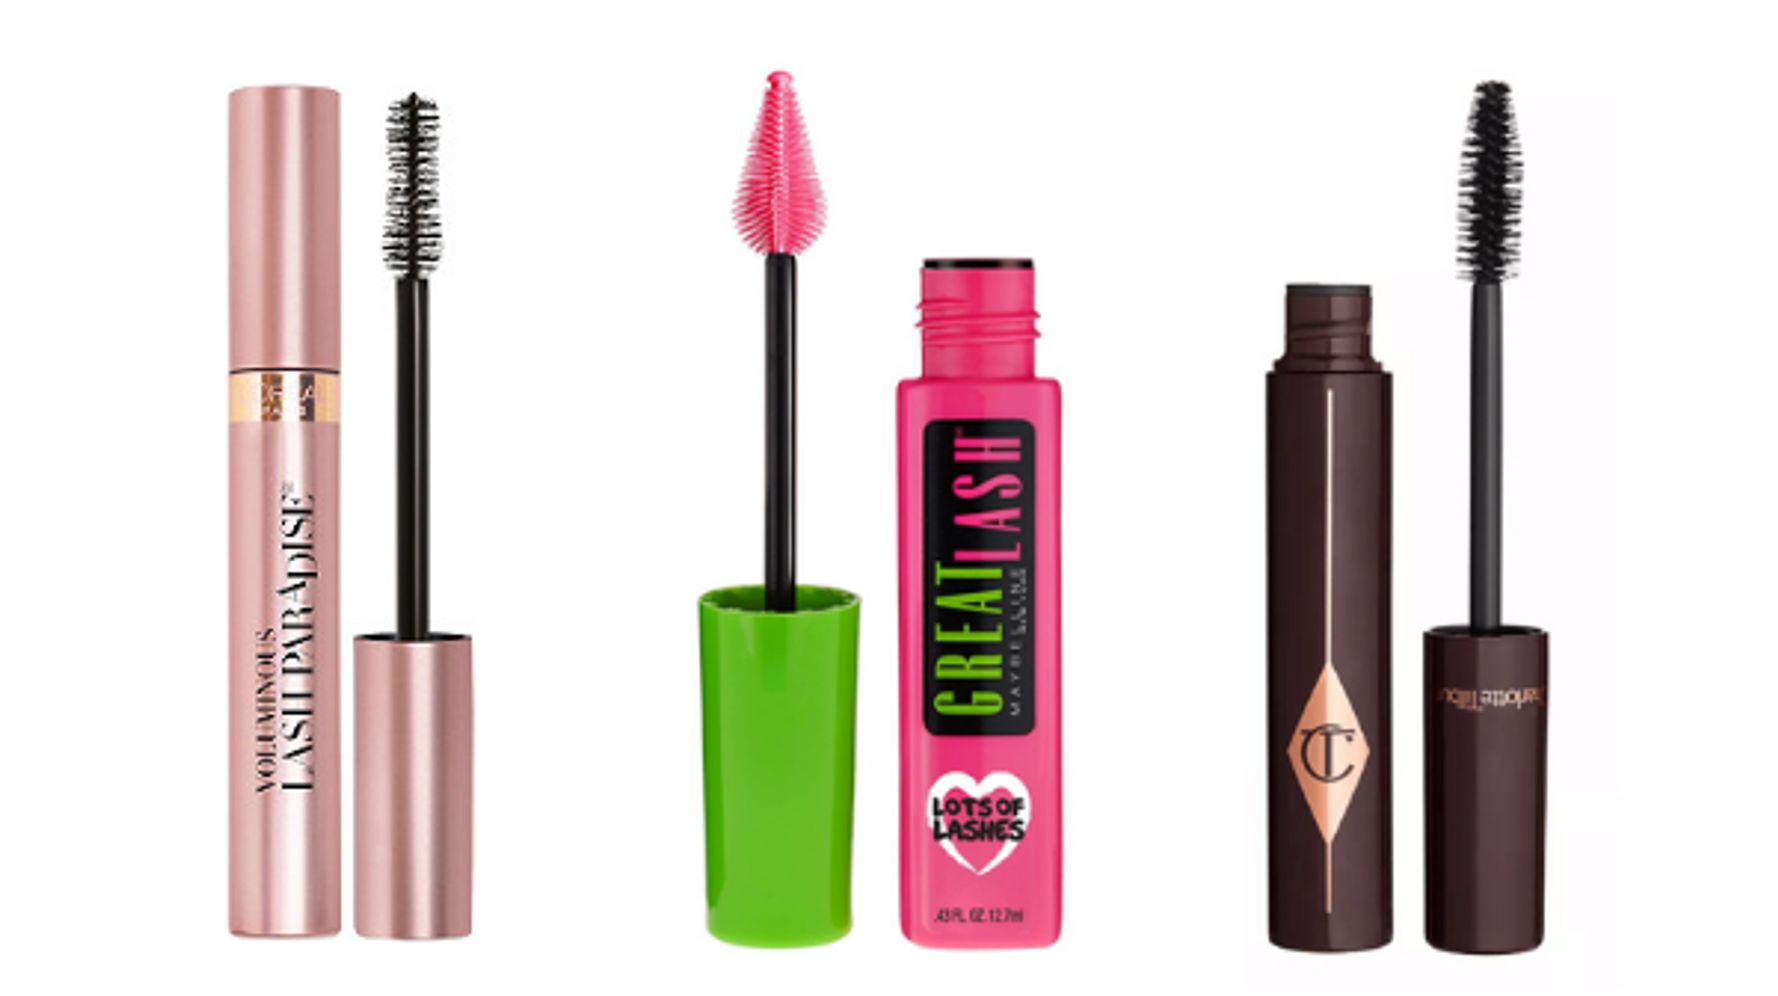 invadere skadedyr Ung The Best Mascaras, According To Beauty Influencers | HuffPost Life